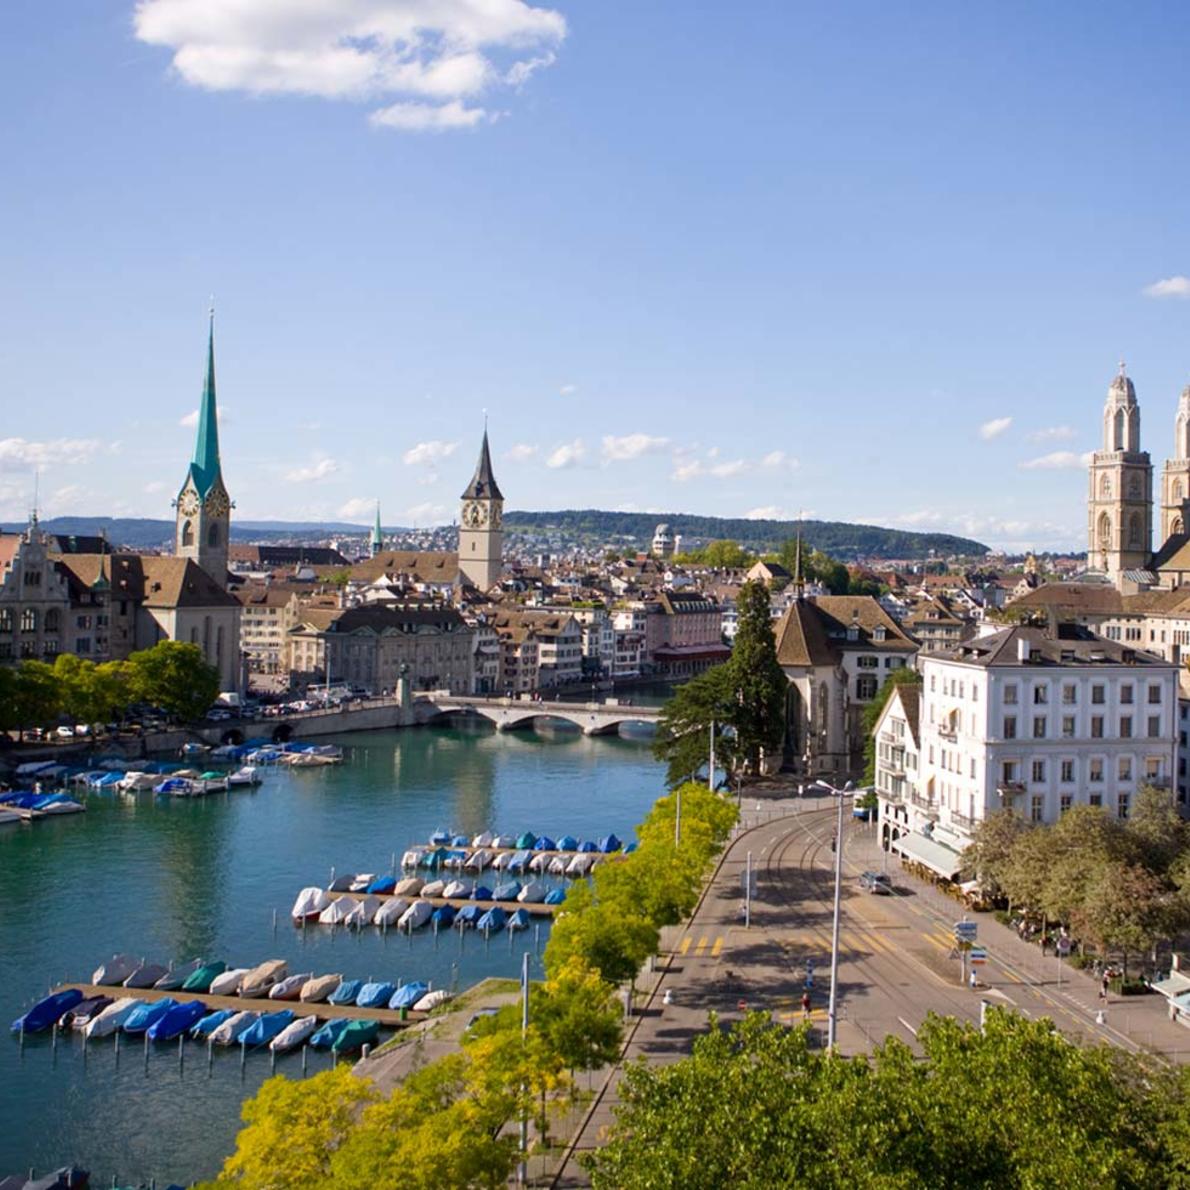 Nice Images Collection: Zurich Desktop Wallpapers